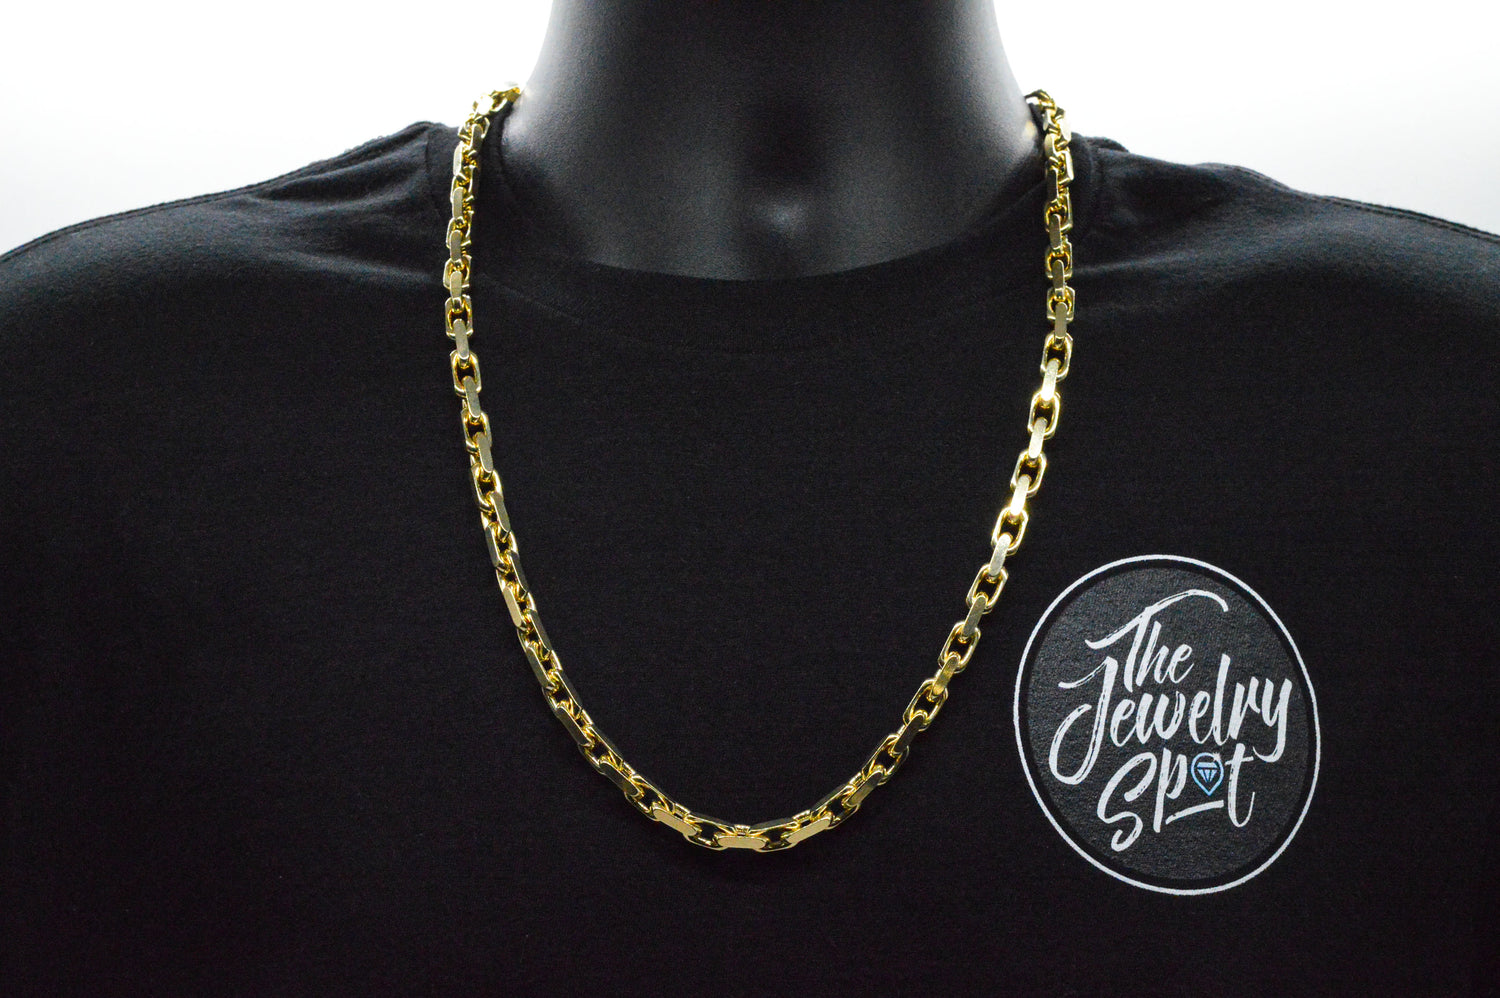 Solid Gold Cable Style Chain Necklaces